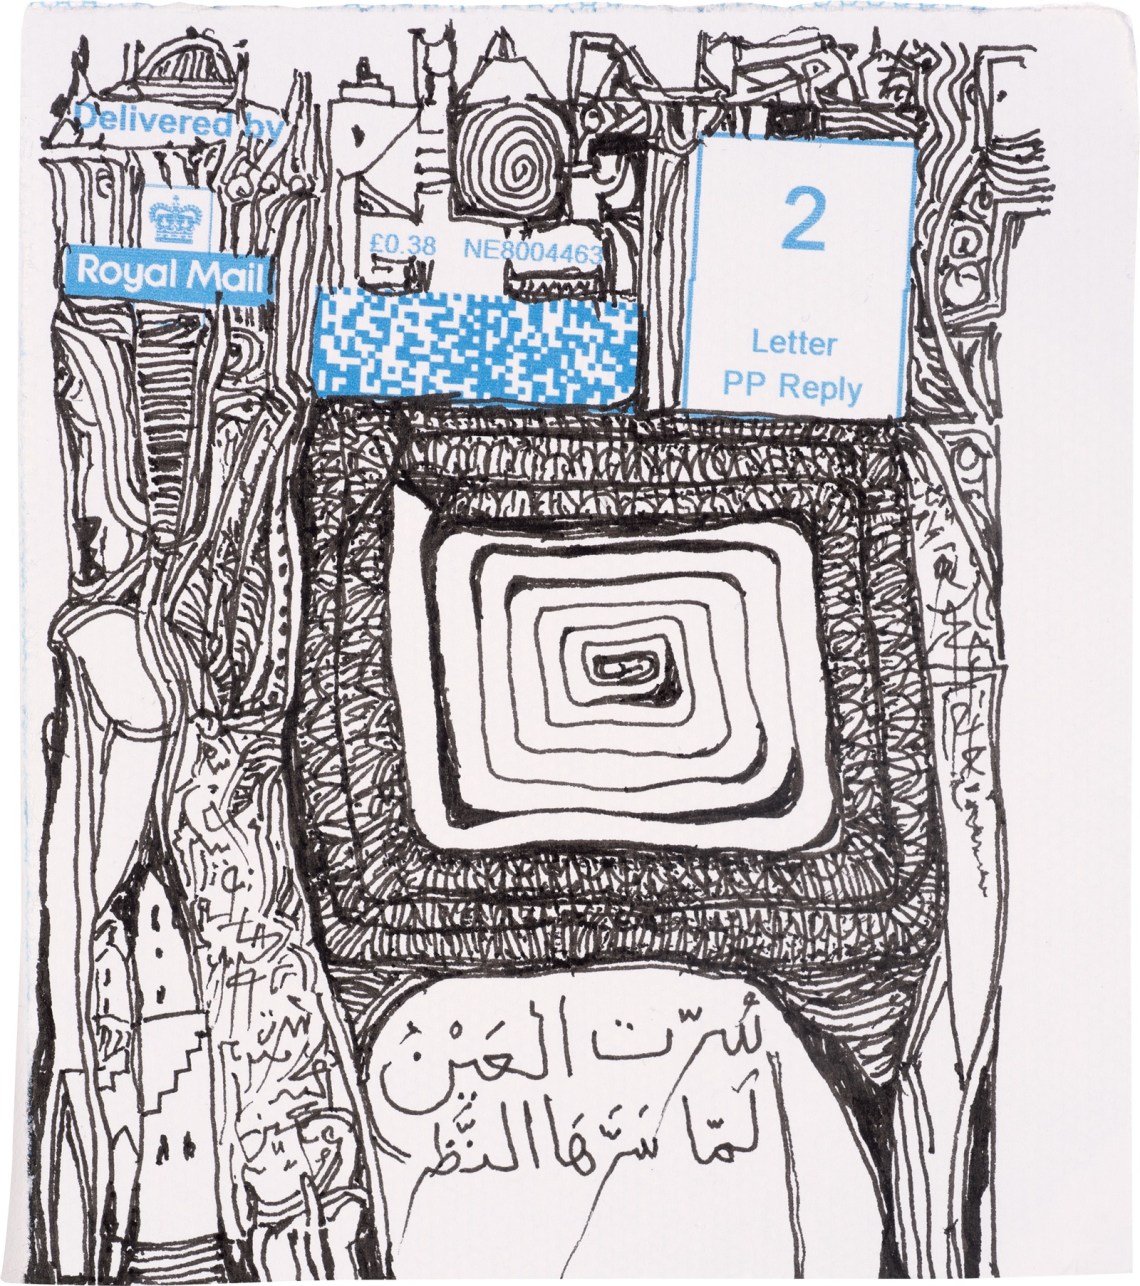 A geometric drawing done on an envelope, including a spiral formation in the center, cities on the edges, and Arabic text in the lower half